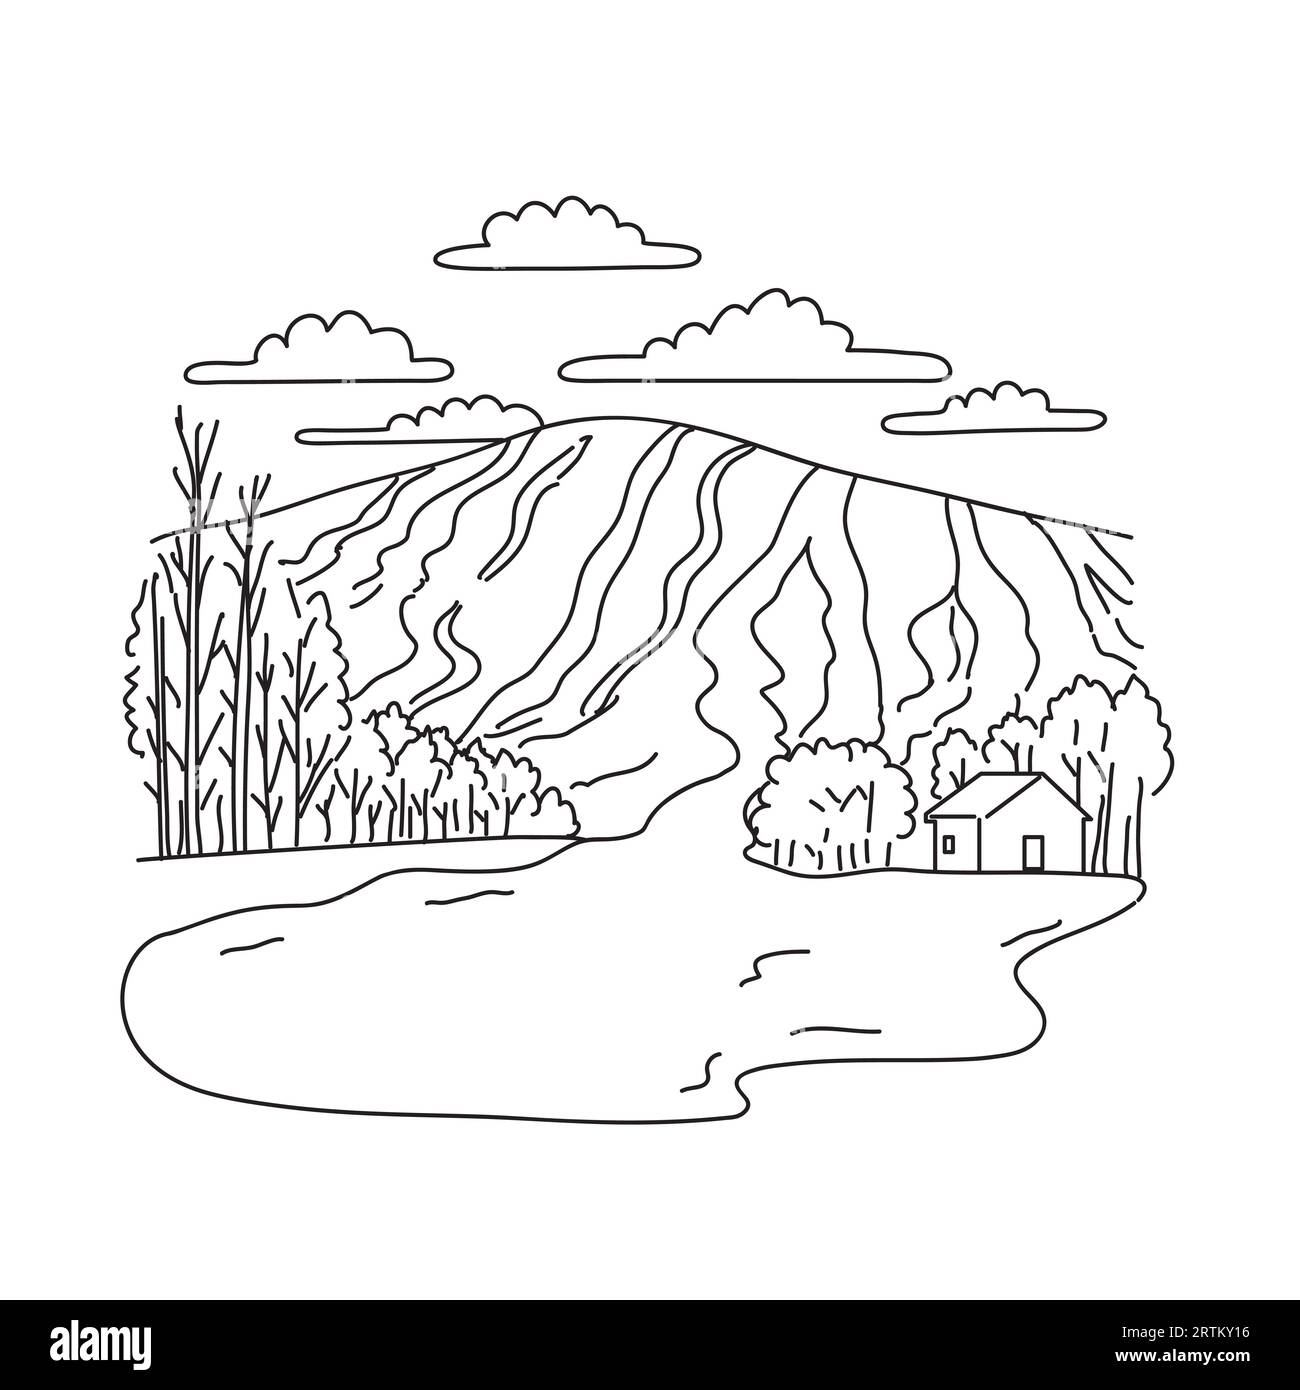 Mono line illustration of Sugarloaf Mountain ski area in Carrabassett Valley, western Maine, USA done in monoline line black and white art style. Stock Photo